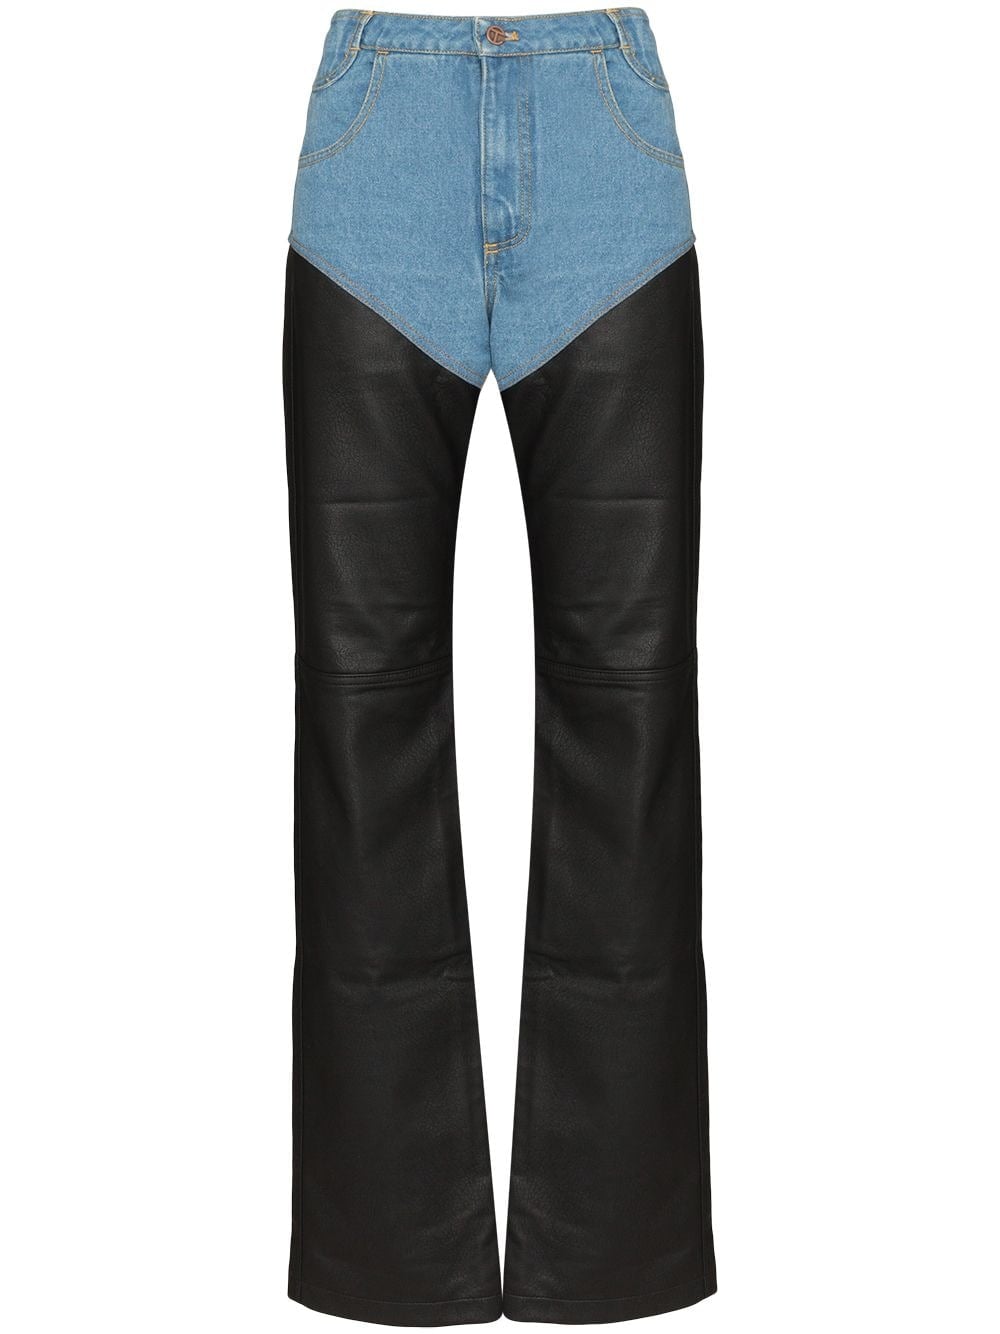 Revival seriously wave Our Pick: Telfar High-Waisted Denim and Leather Trousers | If You Can Find  Someone With More Leather Pants Than Kim Kardashian, I'll Buy You a Pair |  POPSUGAR Fashion Photo 17